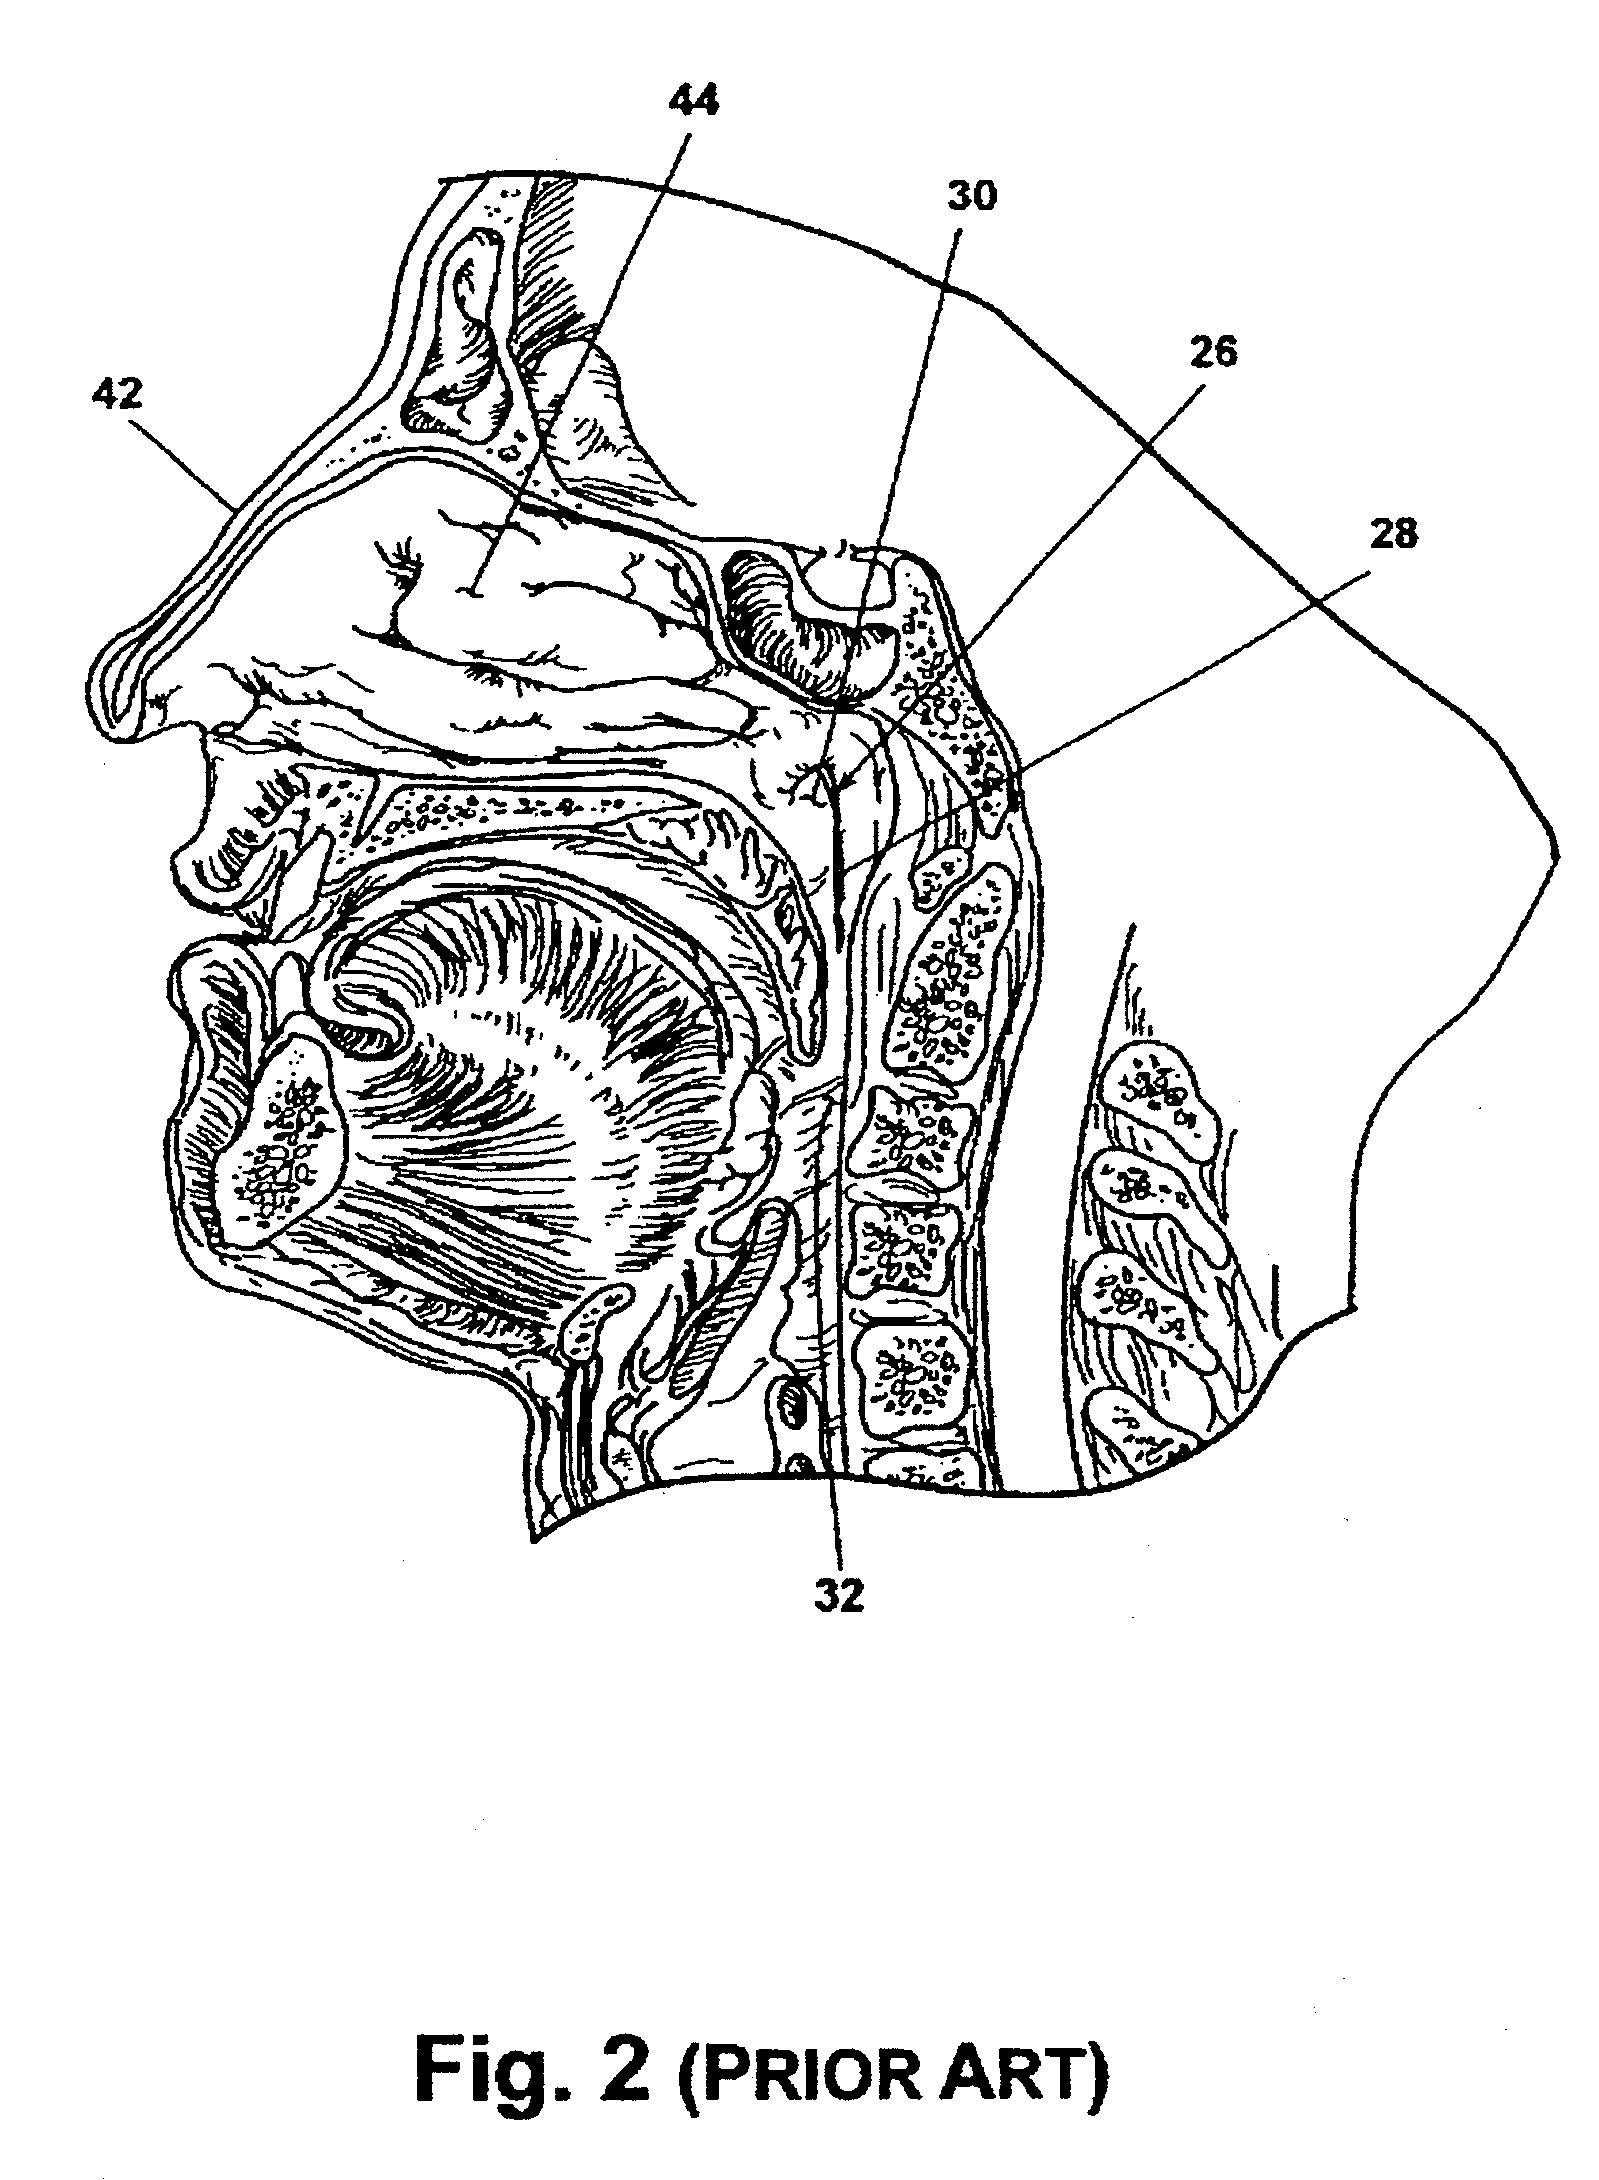 Method and System for Accessing, Diagnosing and Treating Target Tissue Regions Within the Middle Ear and the Eustachian Tube